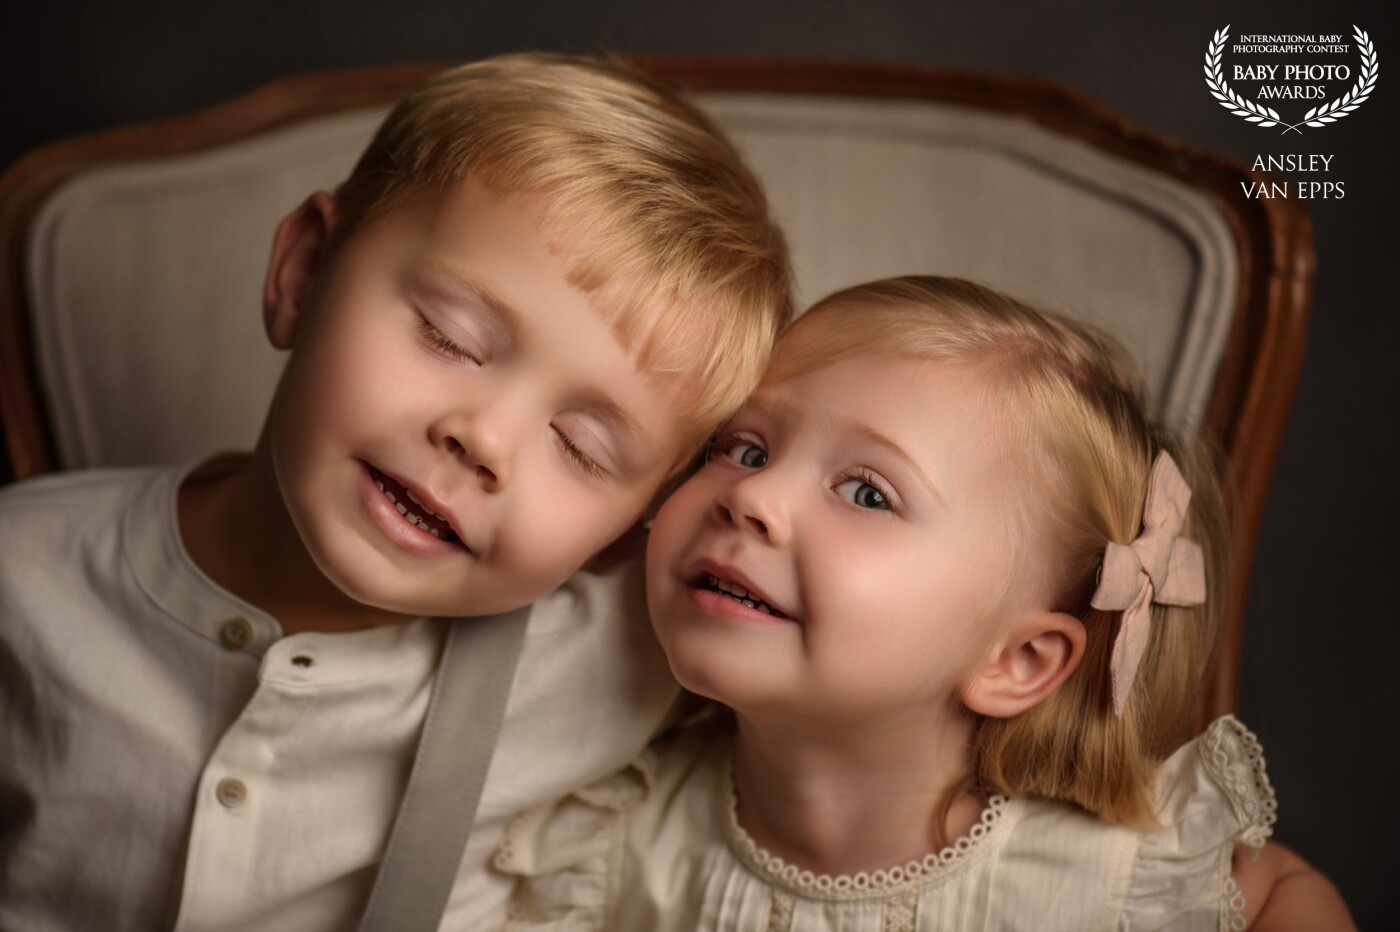 Sibling sessions can be hard to create the sweet look you see in images. But these 2 had such a sweet relationship. I loved capturing this image for mom.